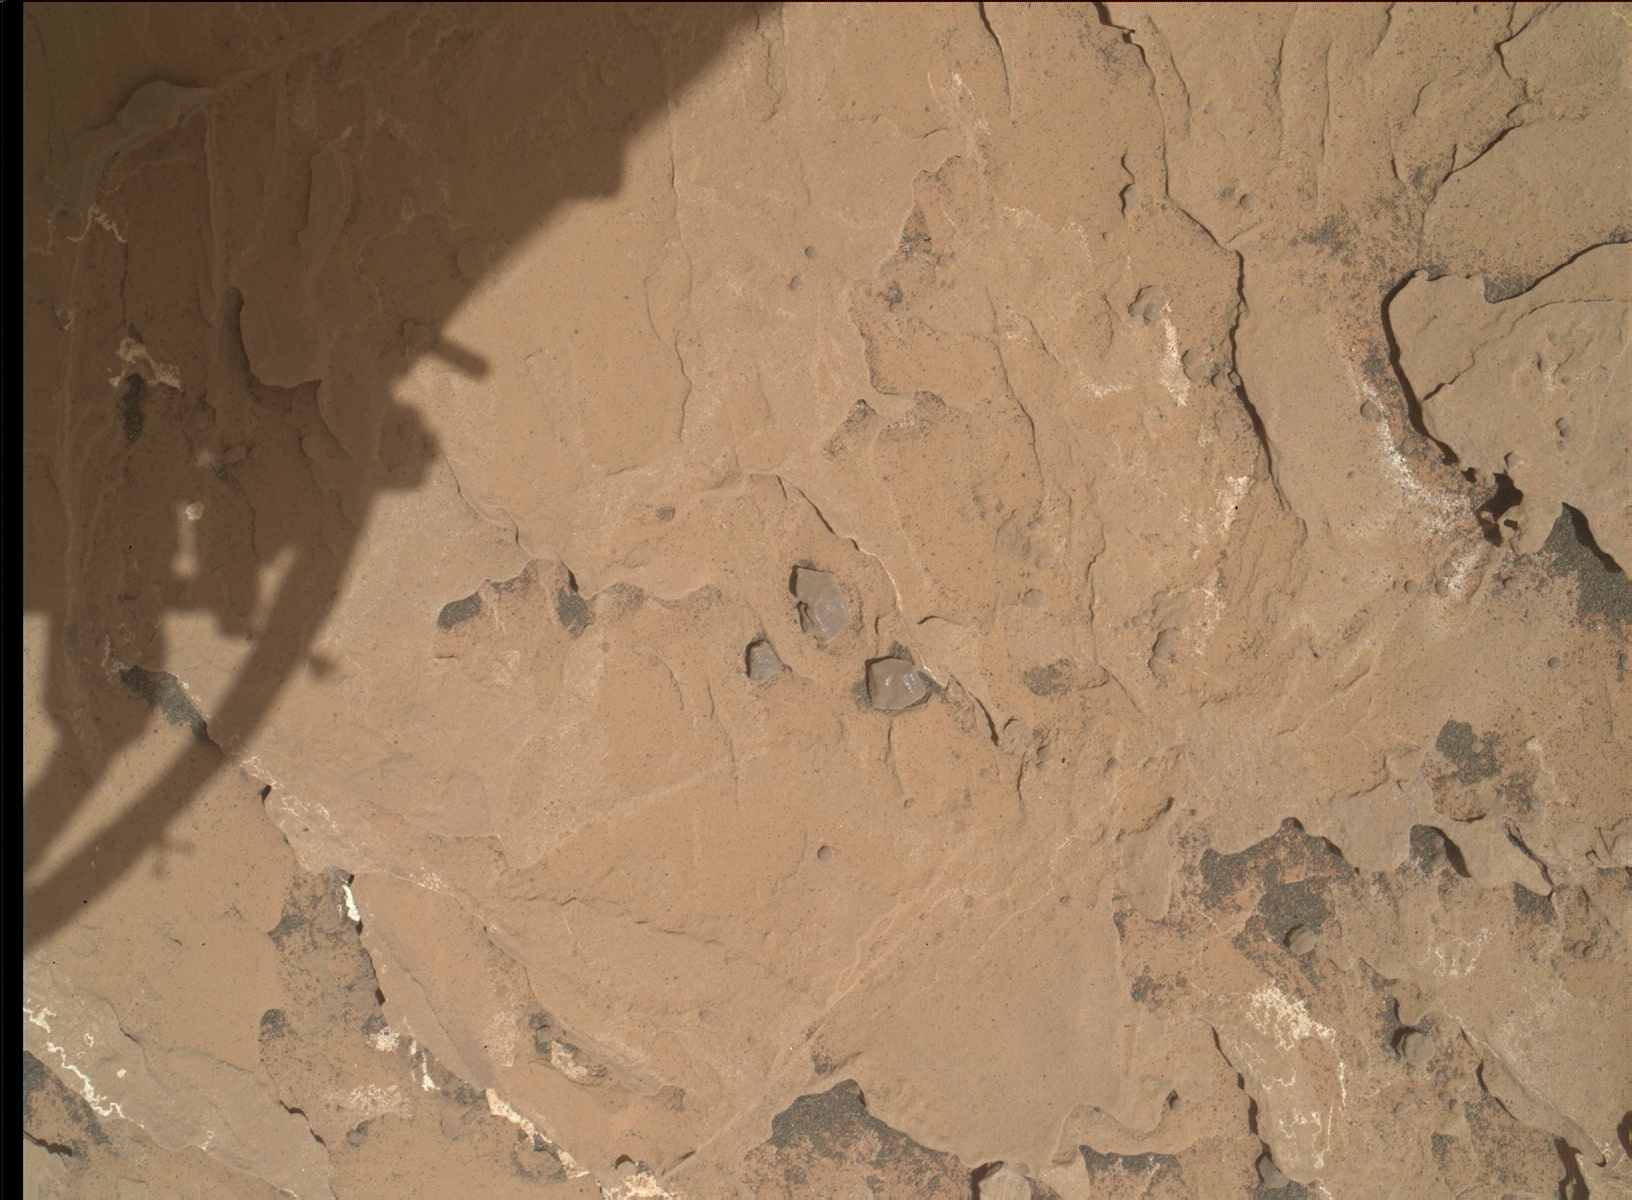 Nasa's Mars rover Curiosity acquired this image using its Mars Hand Lens Imager (MAHLI) on Sol 1788